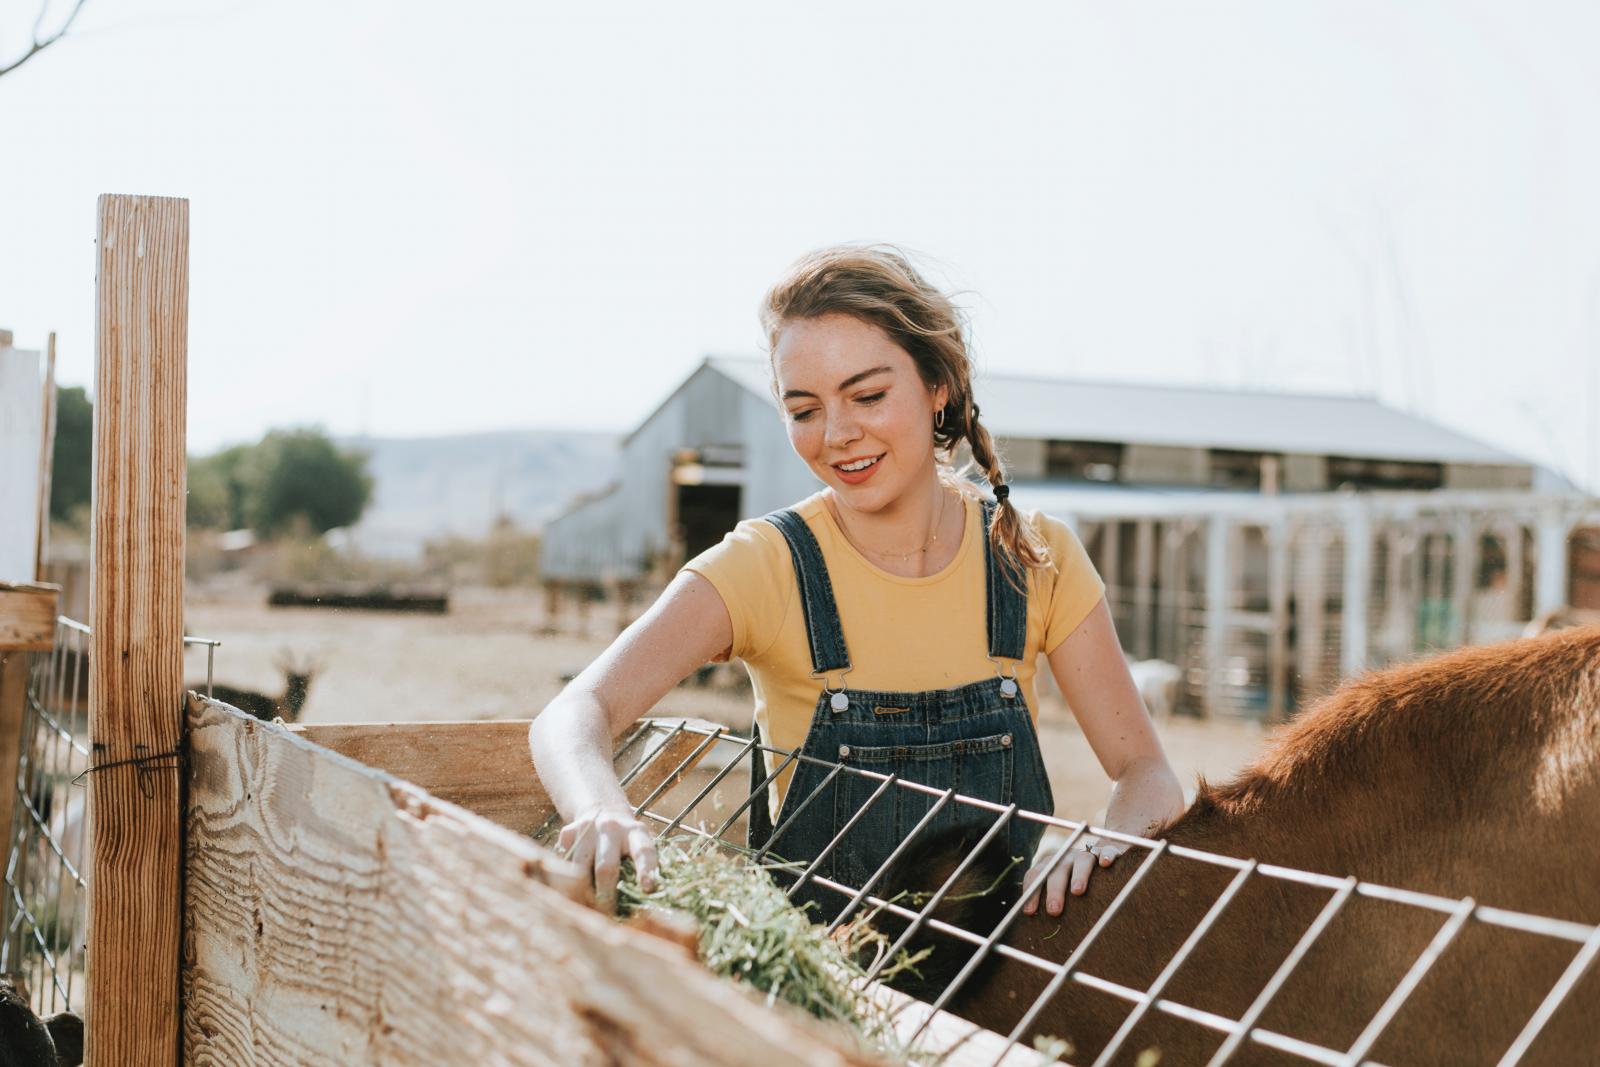 Young woman on a farm. Photo credit: Pexels